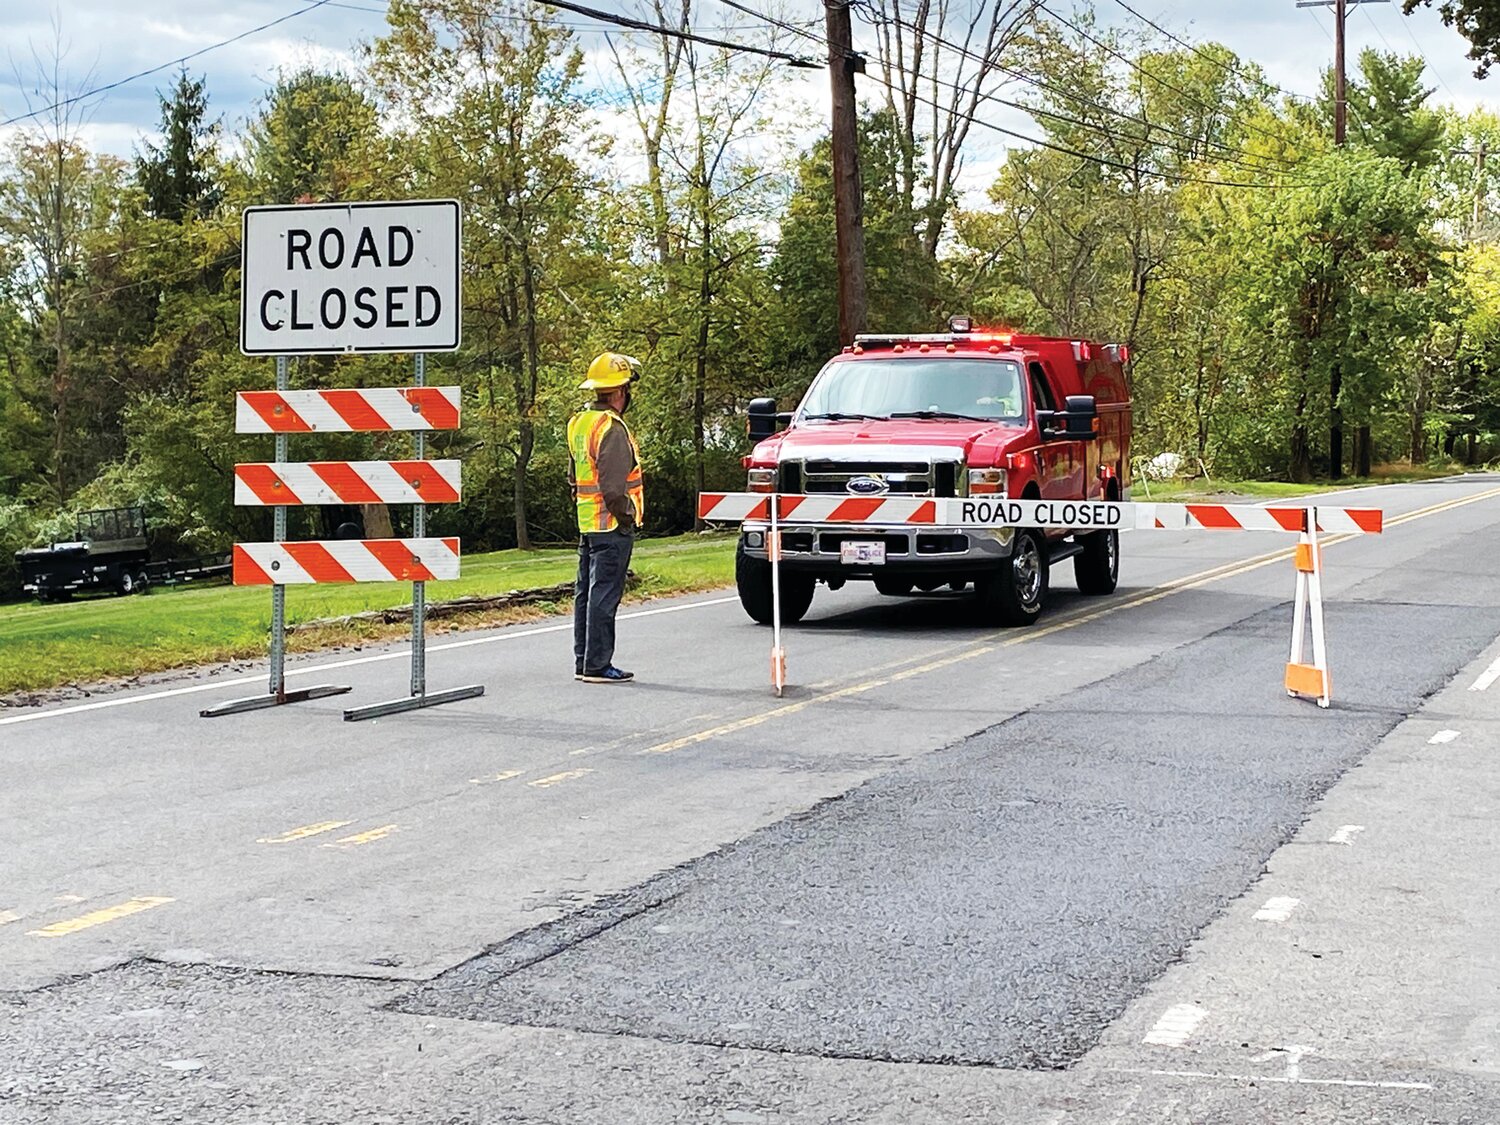 Residents within a 2000-square-foot radius of Ferry and Old Iron Hill roads in Doylestown Township were advised to evacuate, authorities said Monday afternoon, following an accident this morning where a propane truck flipped over along an embankment on Ferry Road.